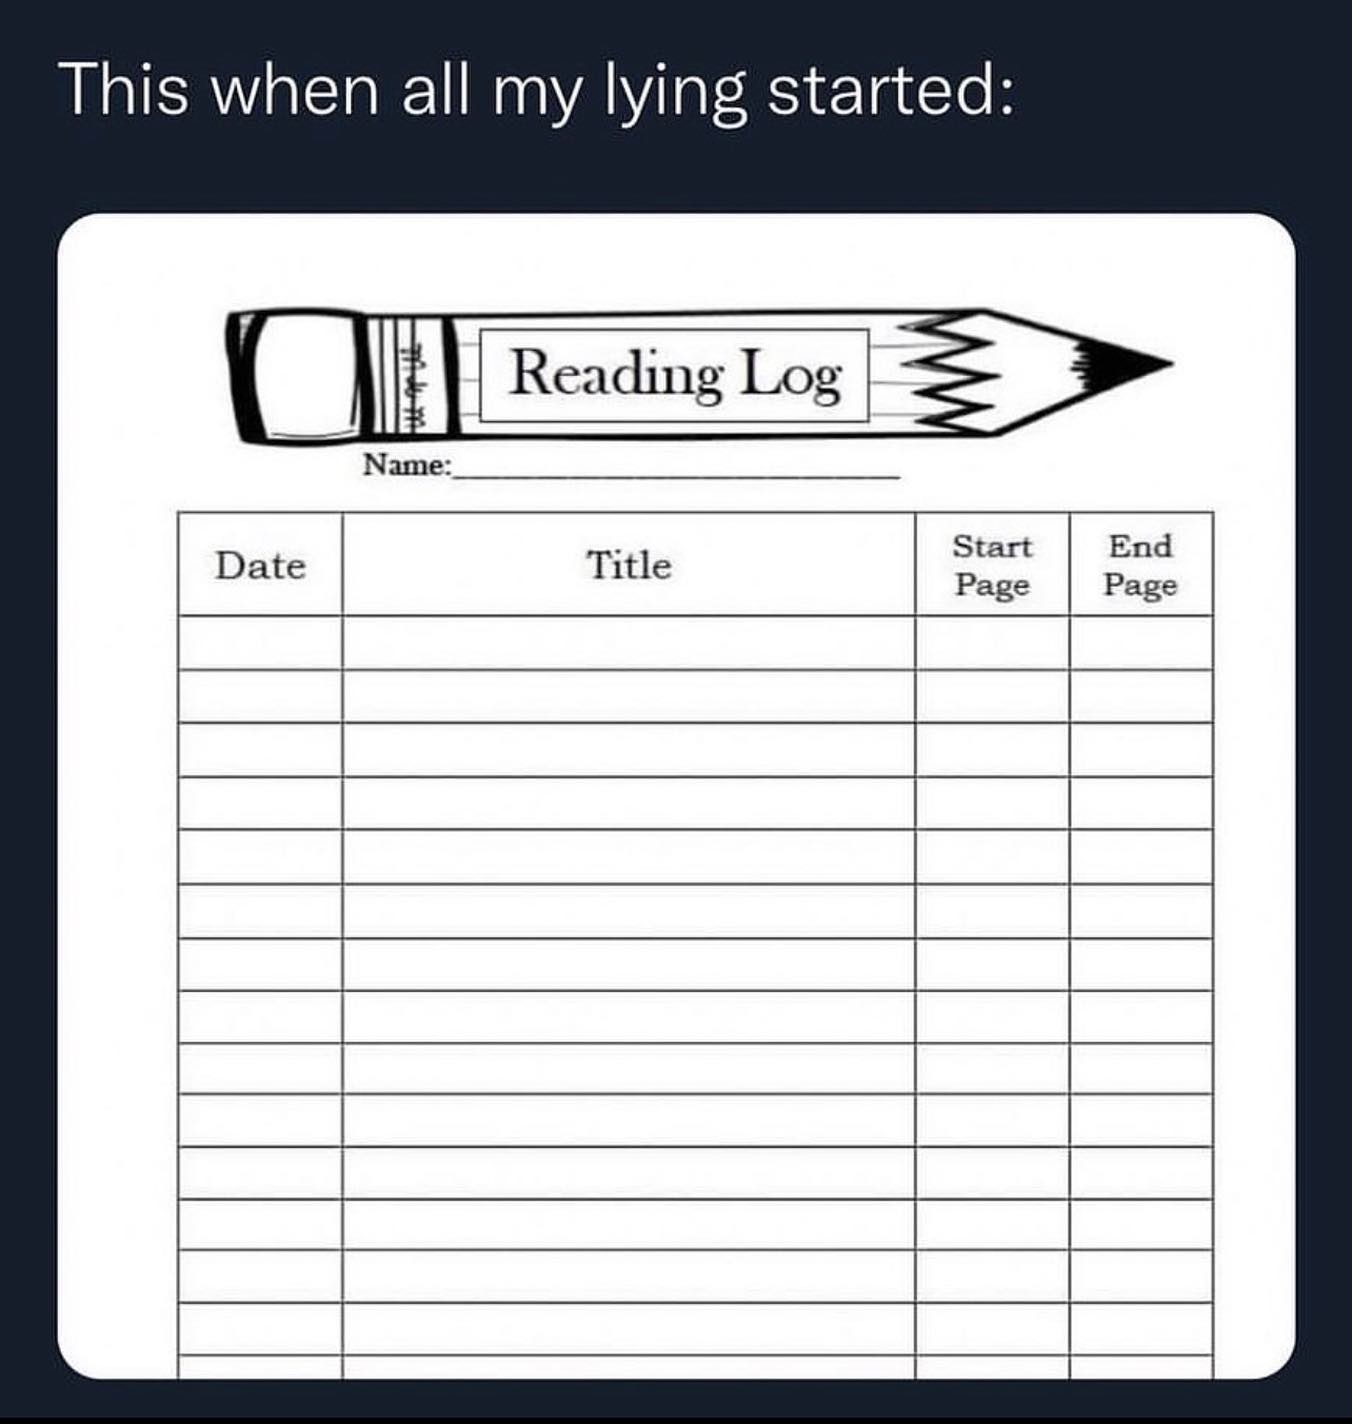 funny memes and pics - paper - This when all my lying started Date Name Reading Log Title Start Page End Page